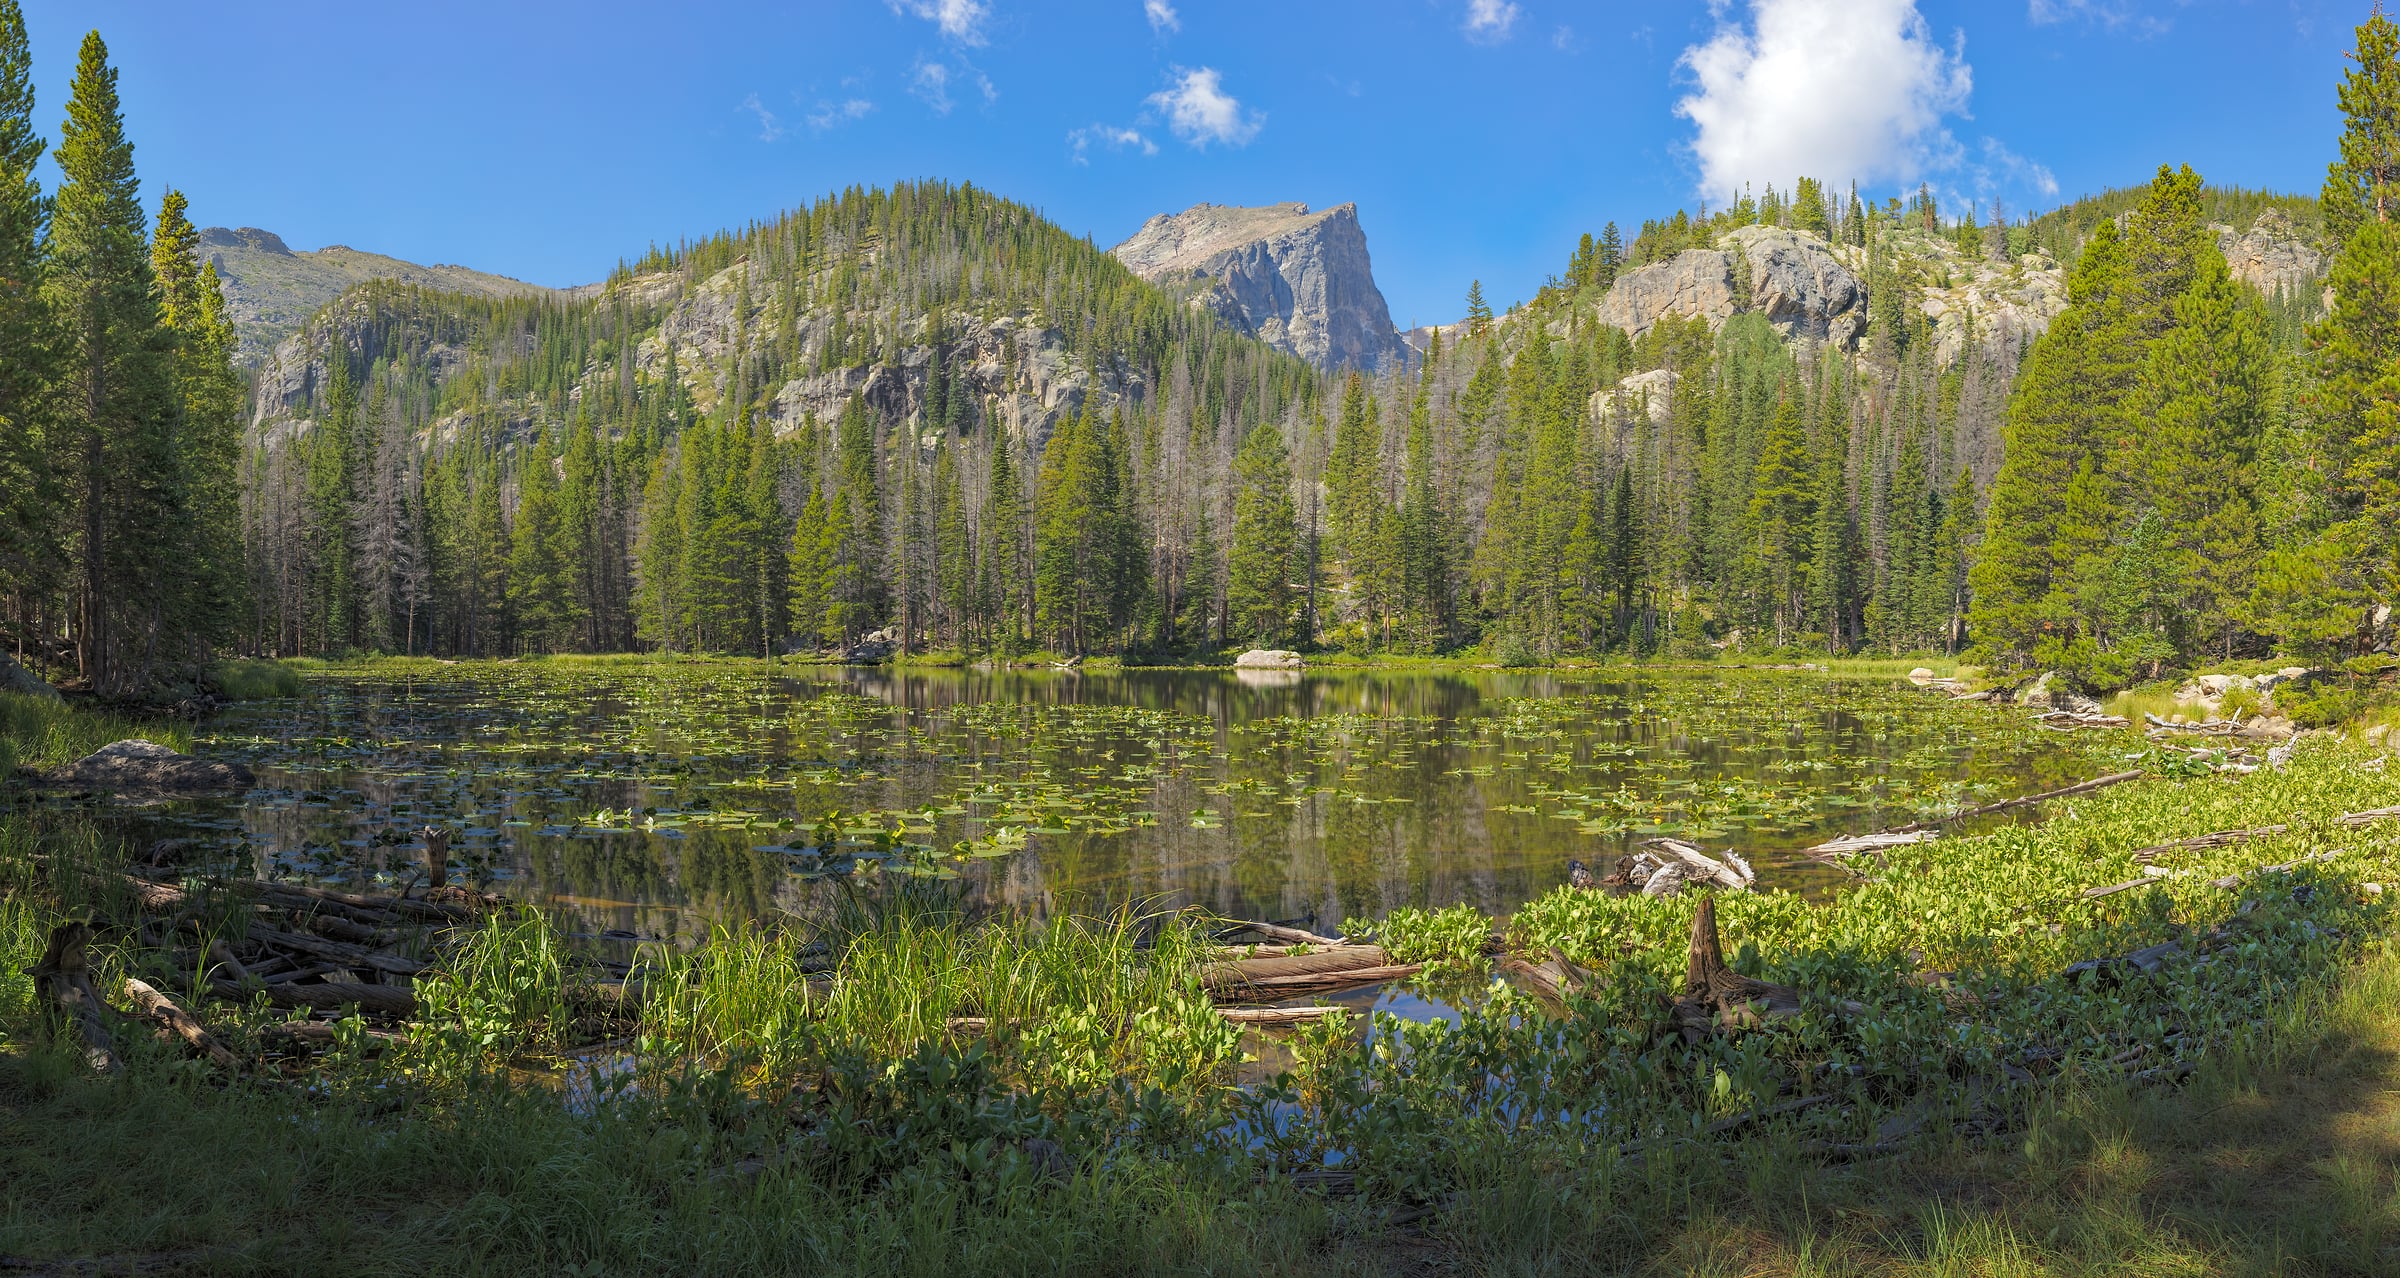 1,810 megapixels! A giant photo of a lake in nature that would be perfect for a wall mural; landscape photograph created by John Freeman at Nymph Lake in Rocky Mountain National Park, Colorado.